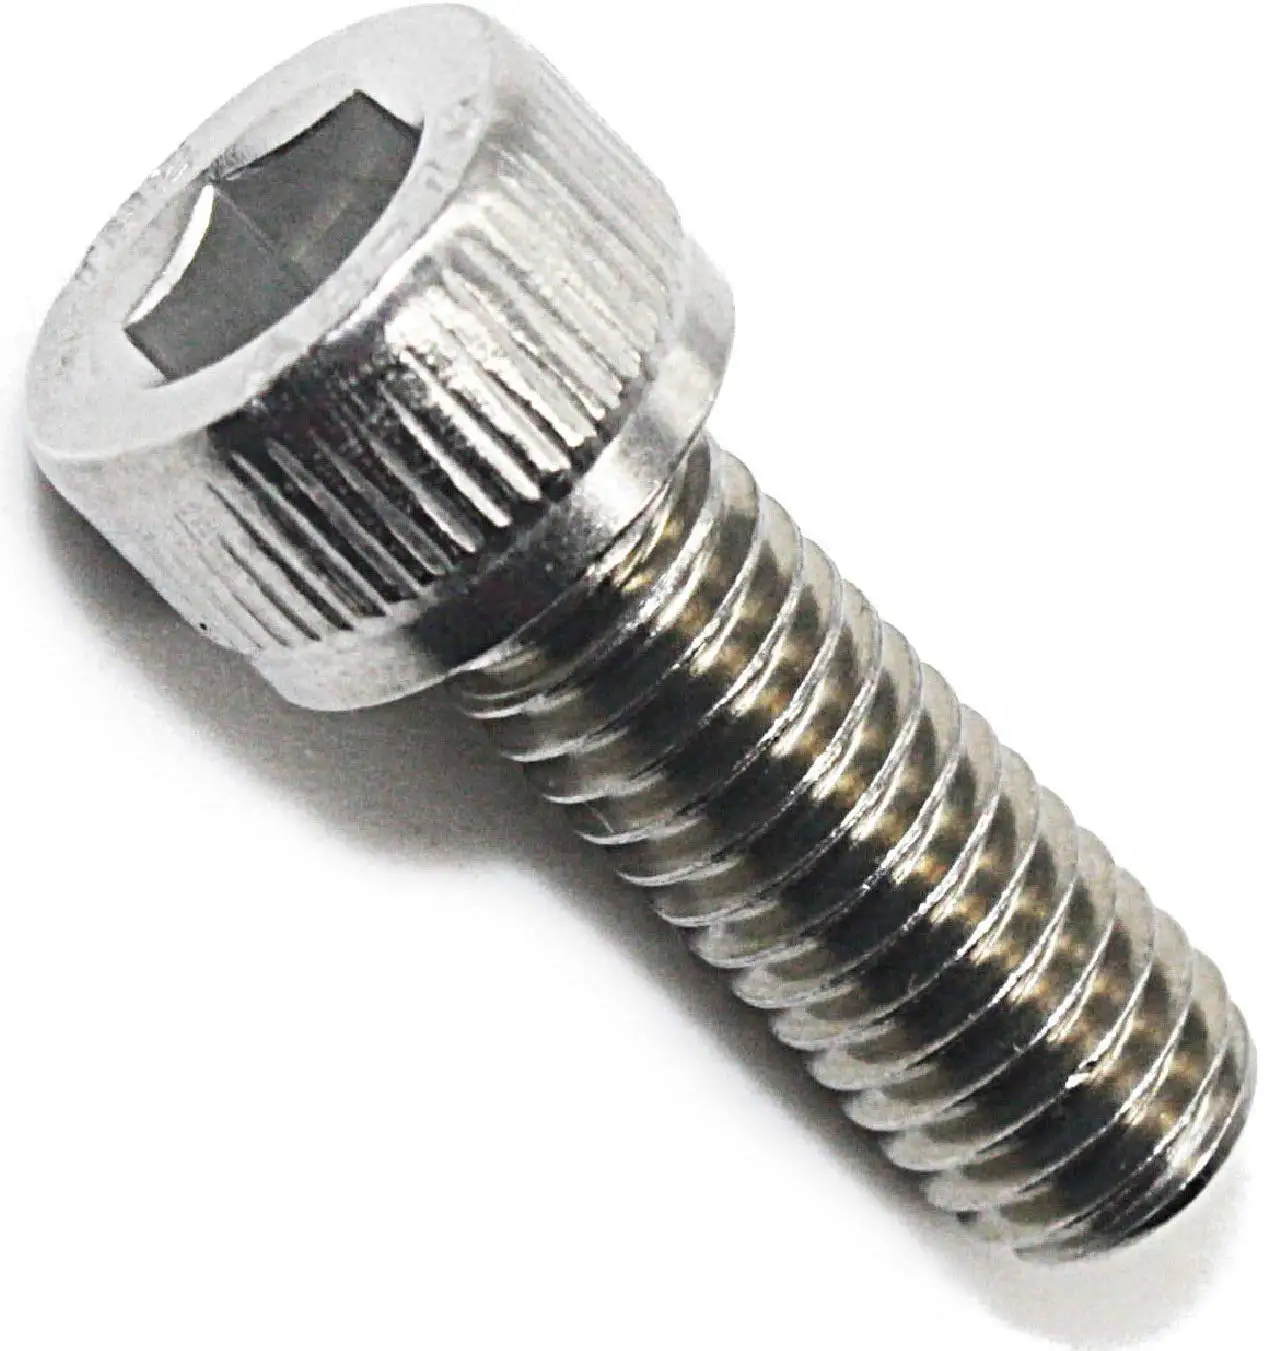 M5 x 16mm Stainless Socket Caps Allen Bolts 20 Pack 